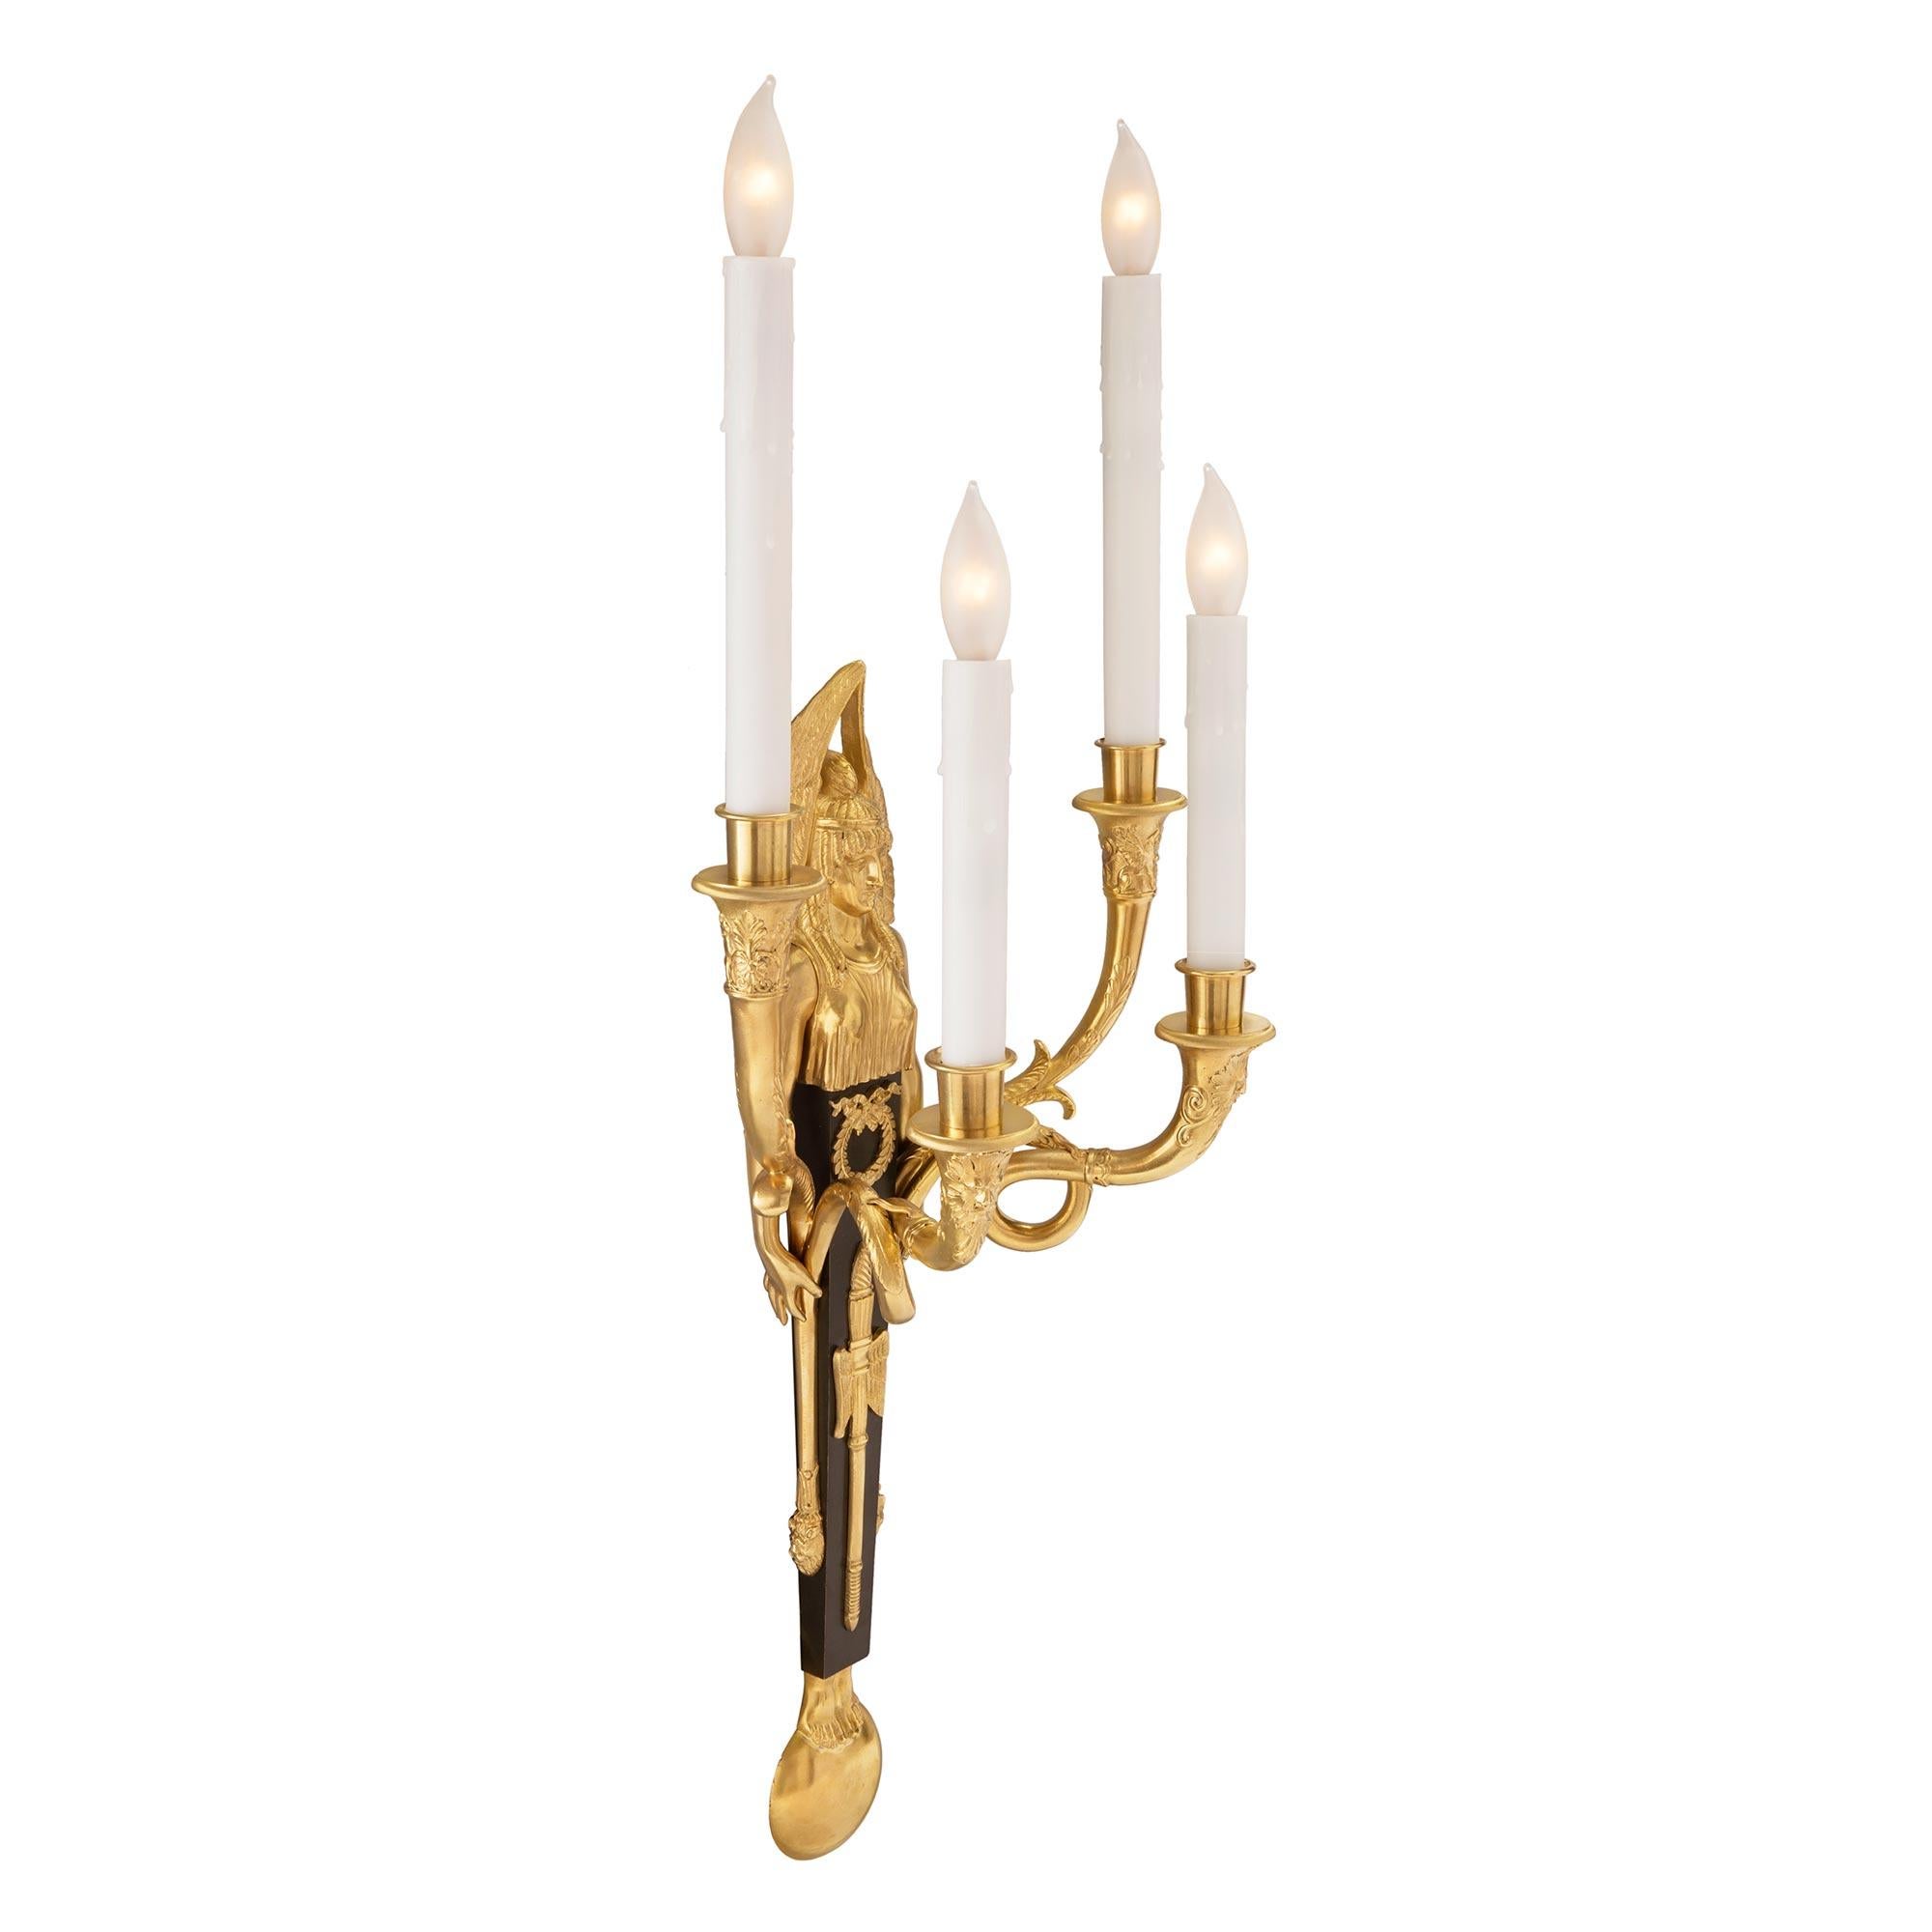 Patinated Pair of French 19th Century Neoclassical St. Bronze and Ormolu Sconces For Sale